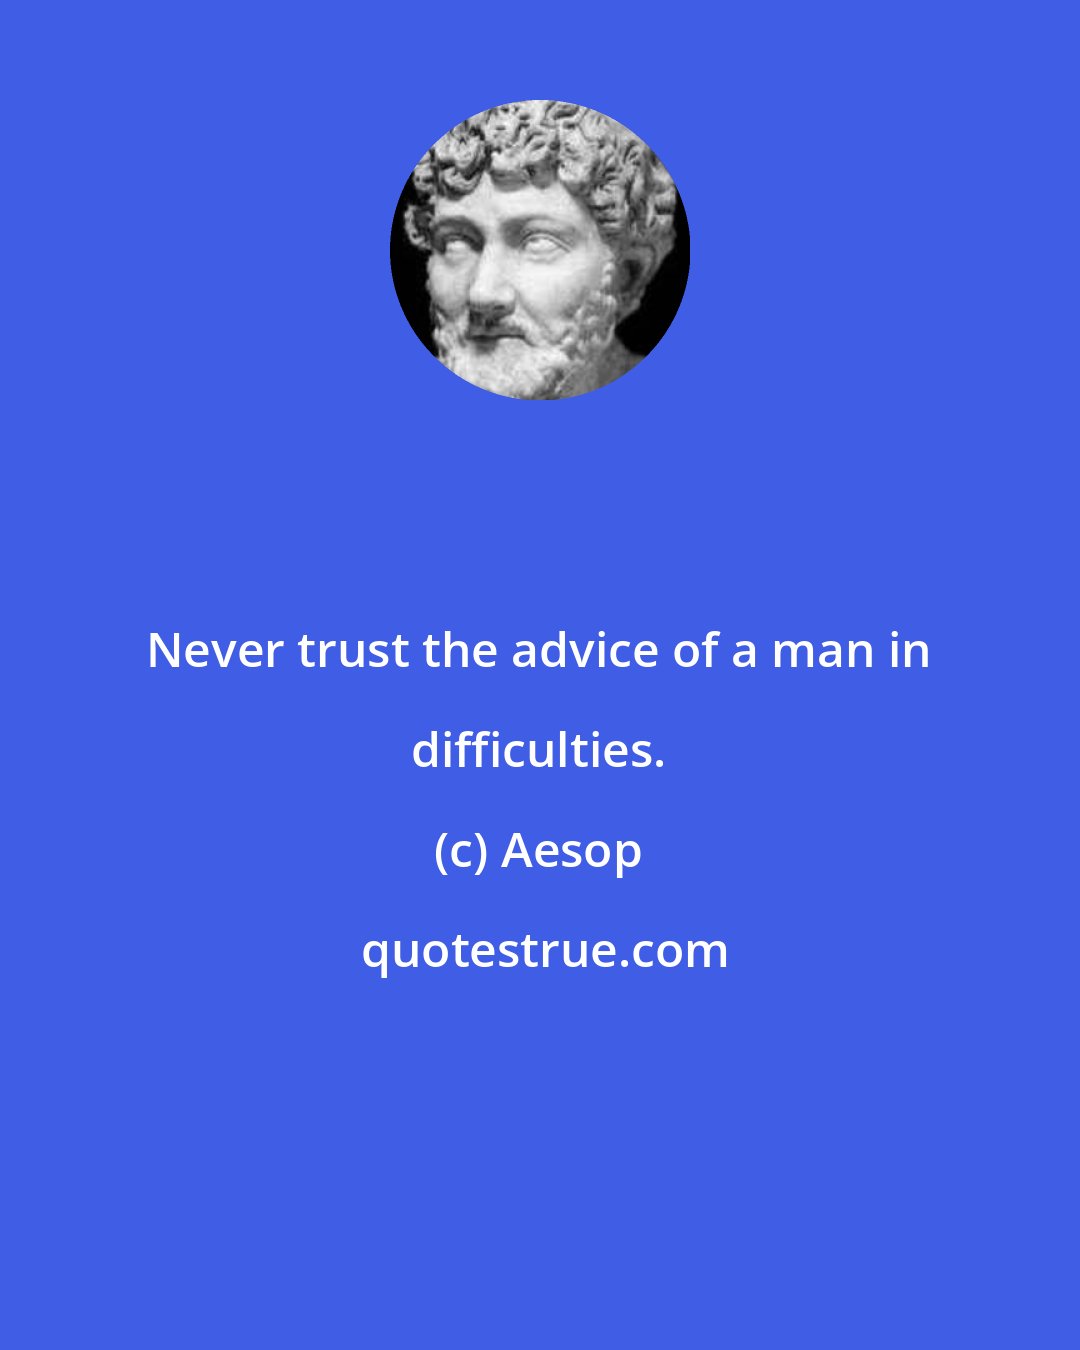 Aesop: Never trust the advice of a man in difficulties.